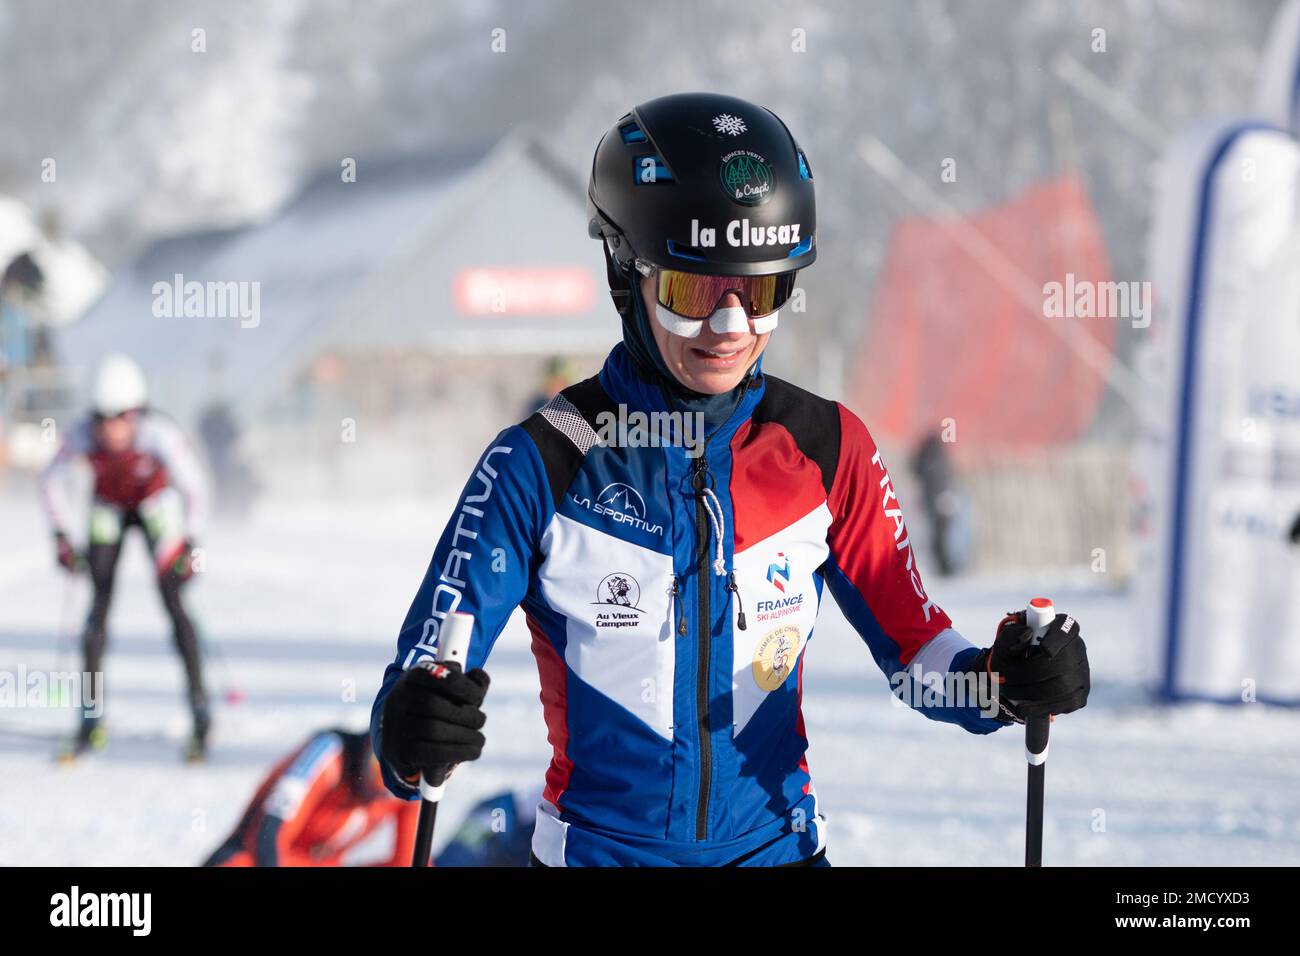 Arinsal, Andorra : January 22, 2023 : Jessica PARDIN of France Skiers in  action during the ISMF Ski Mountaineering World Cup Comapedrosa Vertical  Race Senior Women Andorra 2023 in January 2023 Stock Photo - Alamy